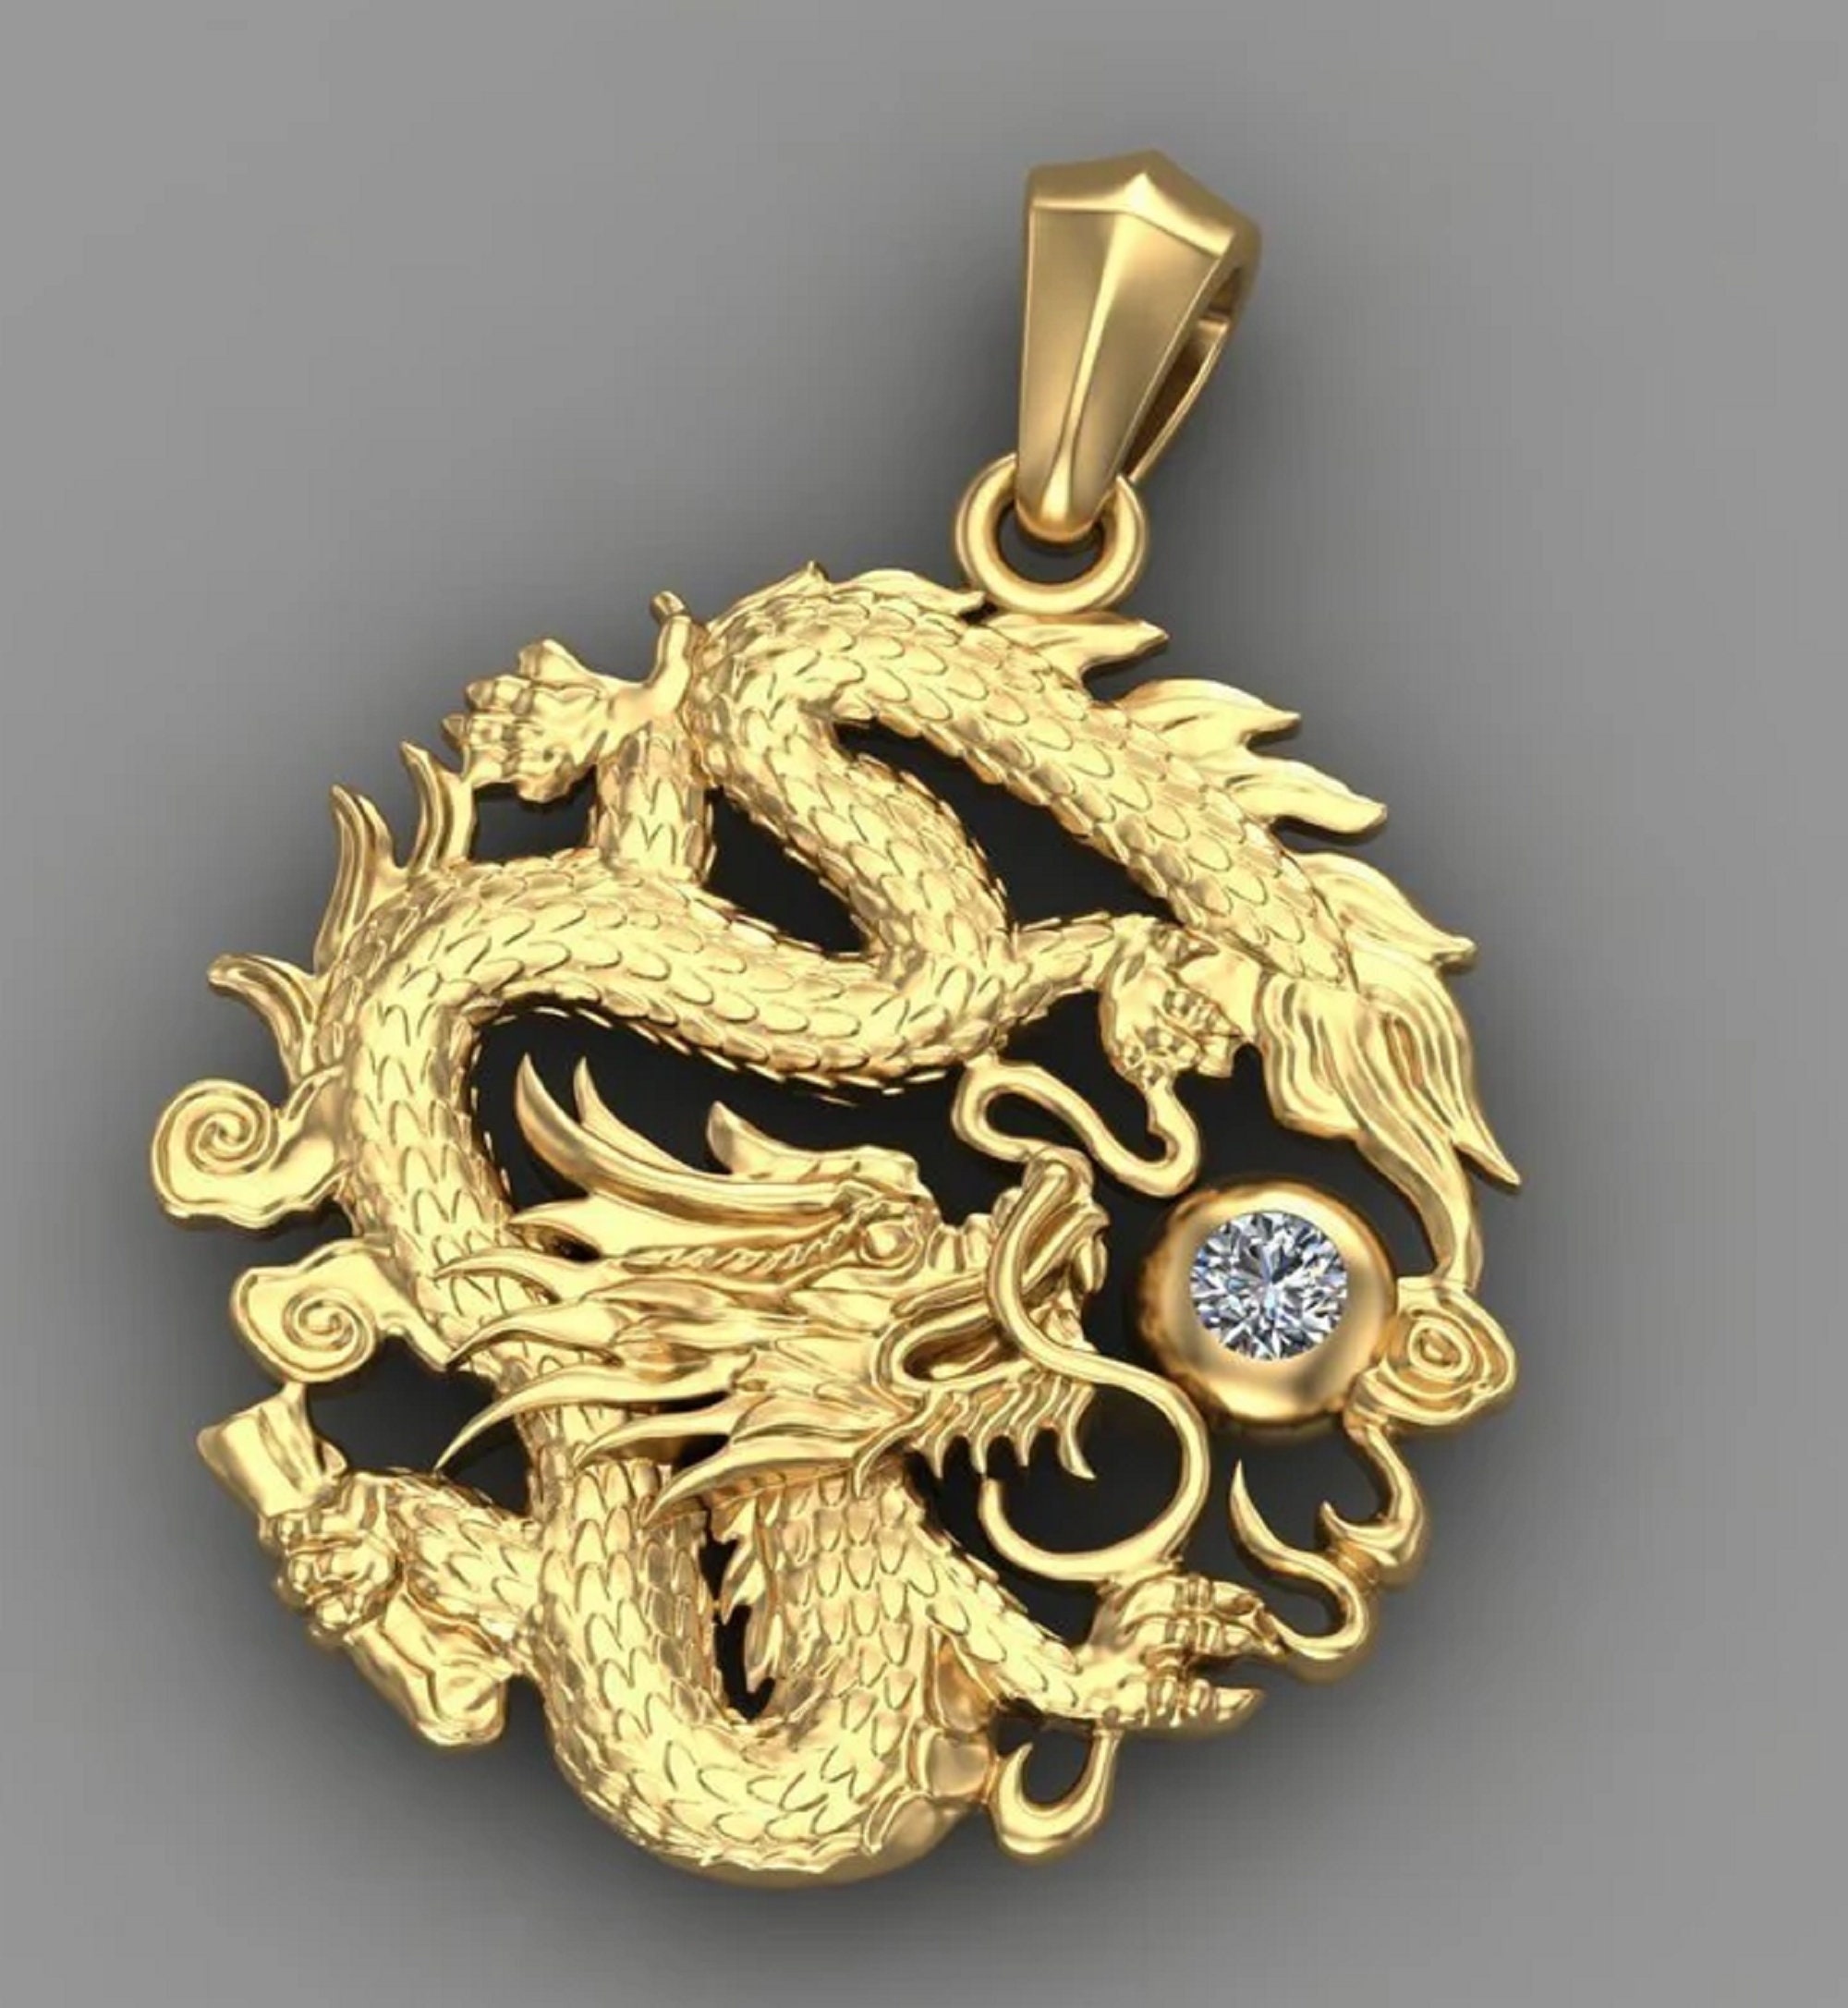 Dragon Charms for Necklace, 18K Gold Filled Charm Pendant With CZ,  Rectangular Dragon Charms for Jewelry Making, One Piece CR0004 